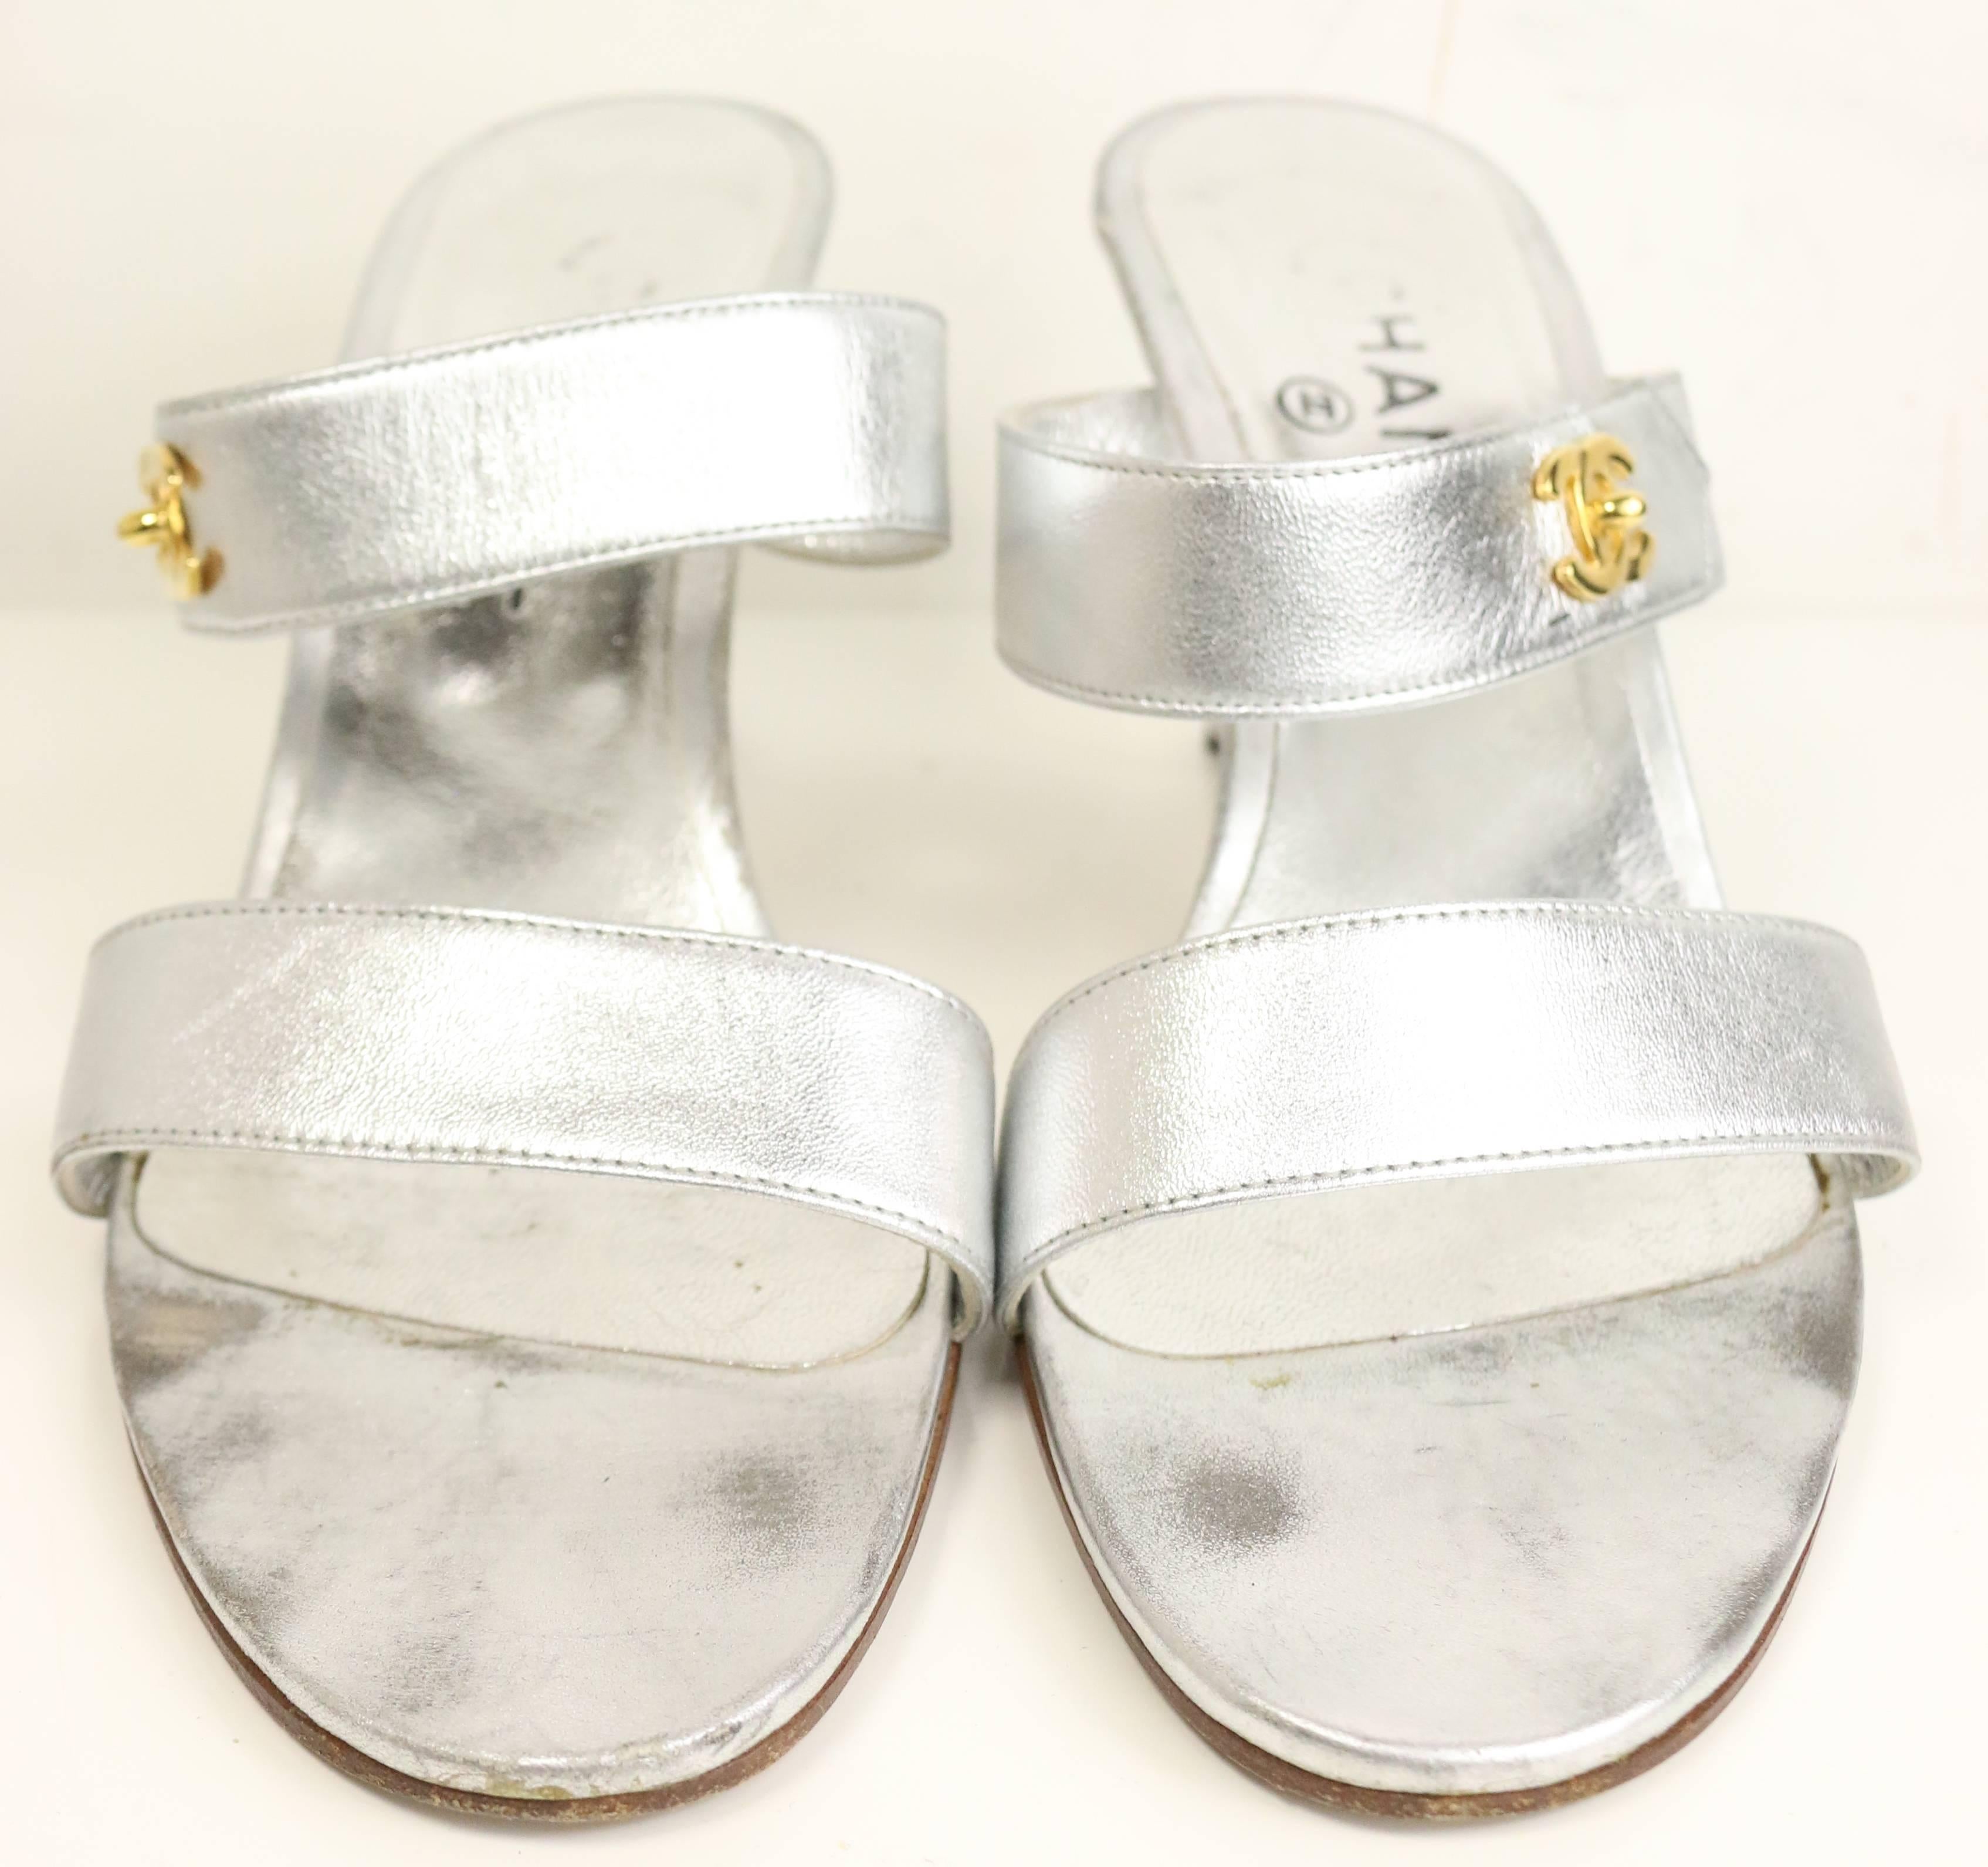 - Vintage 90s Chanel silver metallic leather straps sandals heels. Featuring a gold toned hardware 